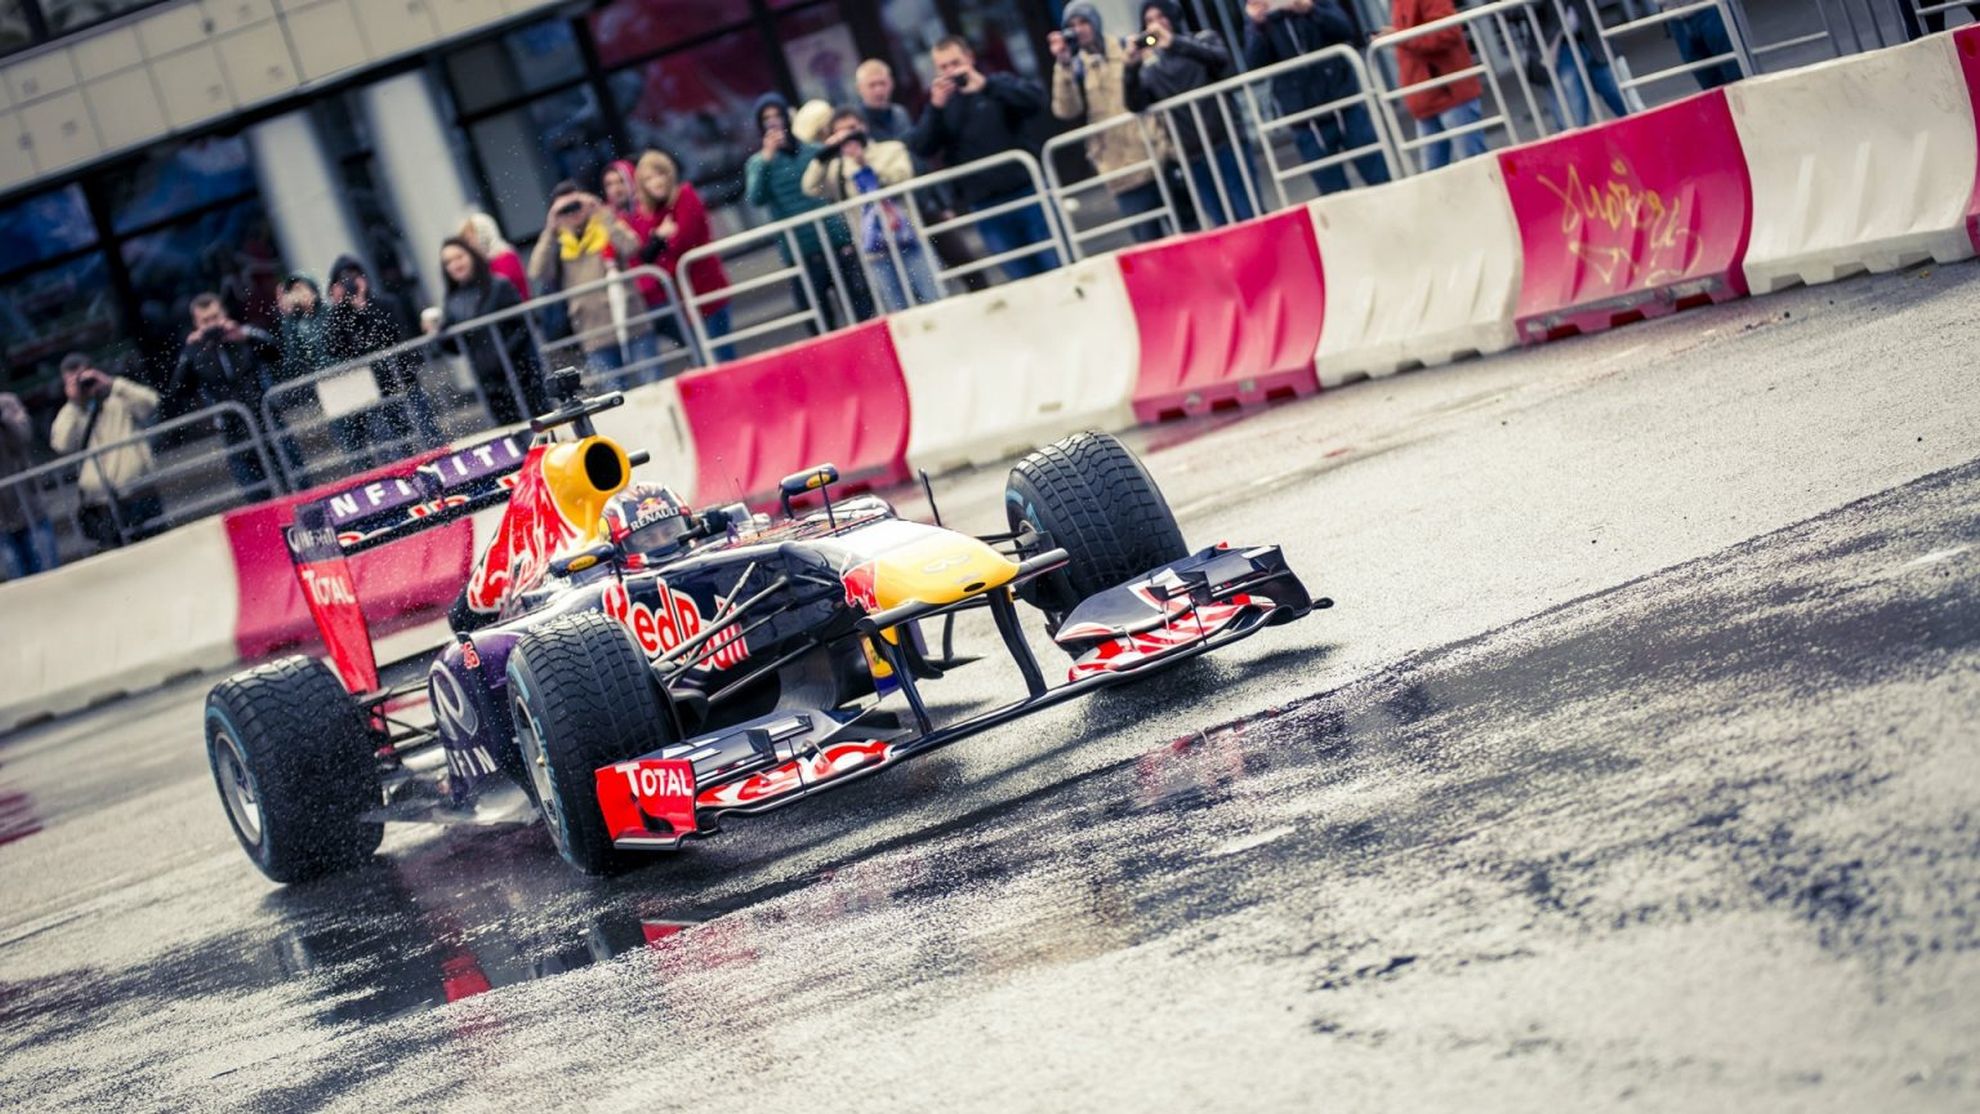 Daniil-Kvyat-put-on-a-show-for-fans-in-his-homeland-over-the-weekend-when-he-joined-the-Kazan-City-Racing-demonstration-on-Sunday-2